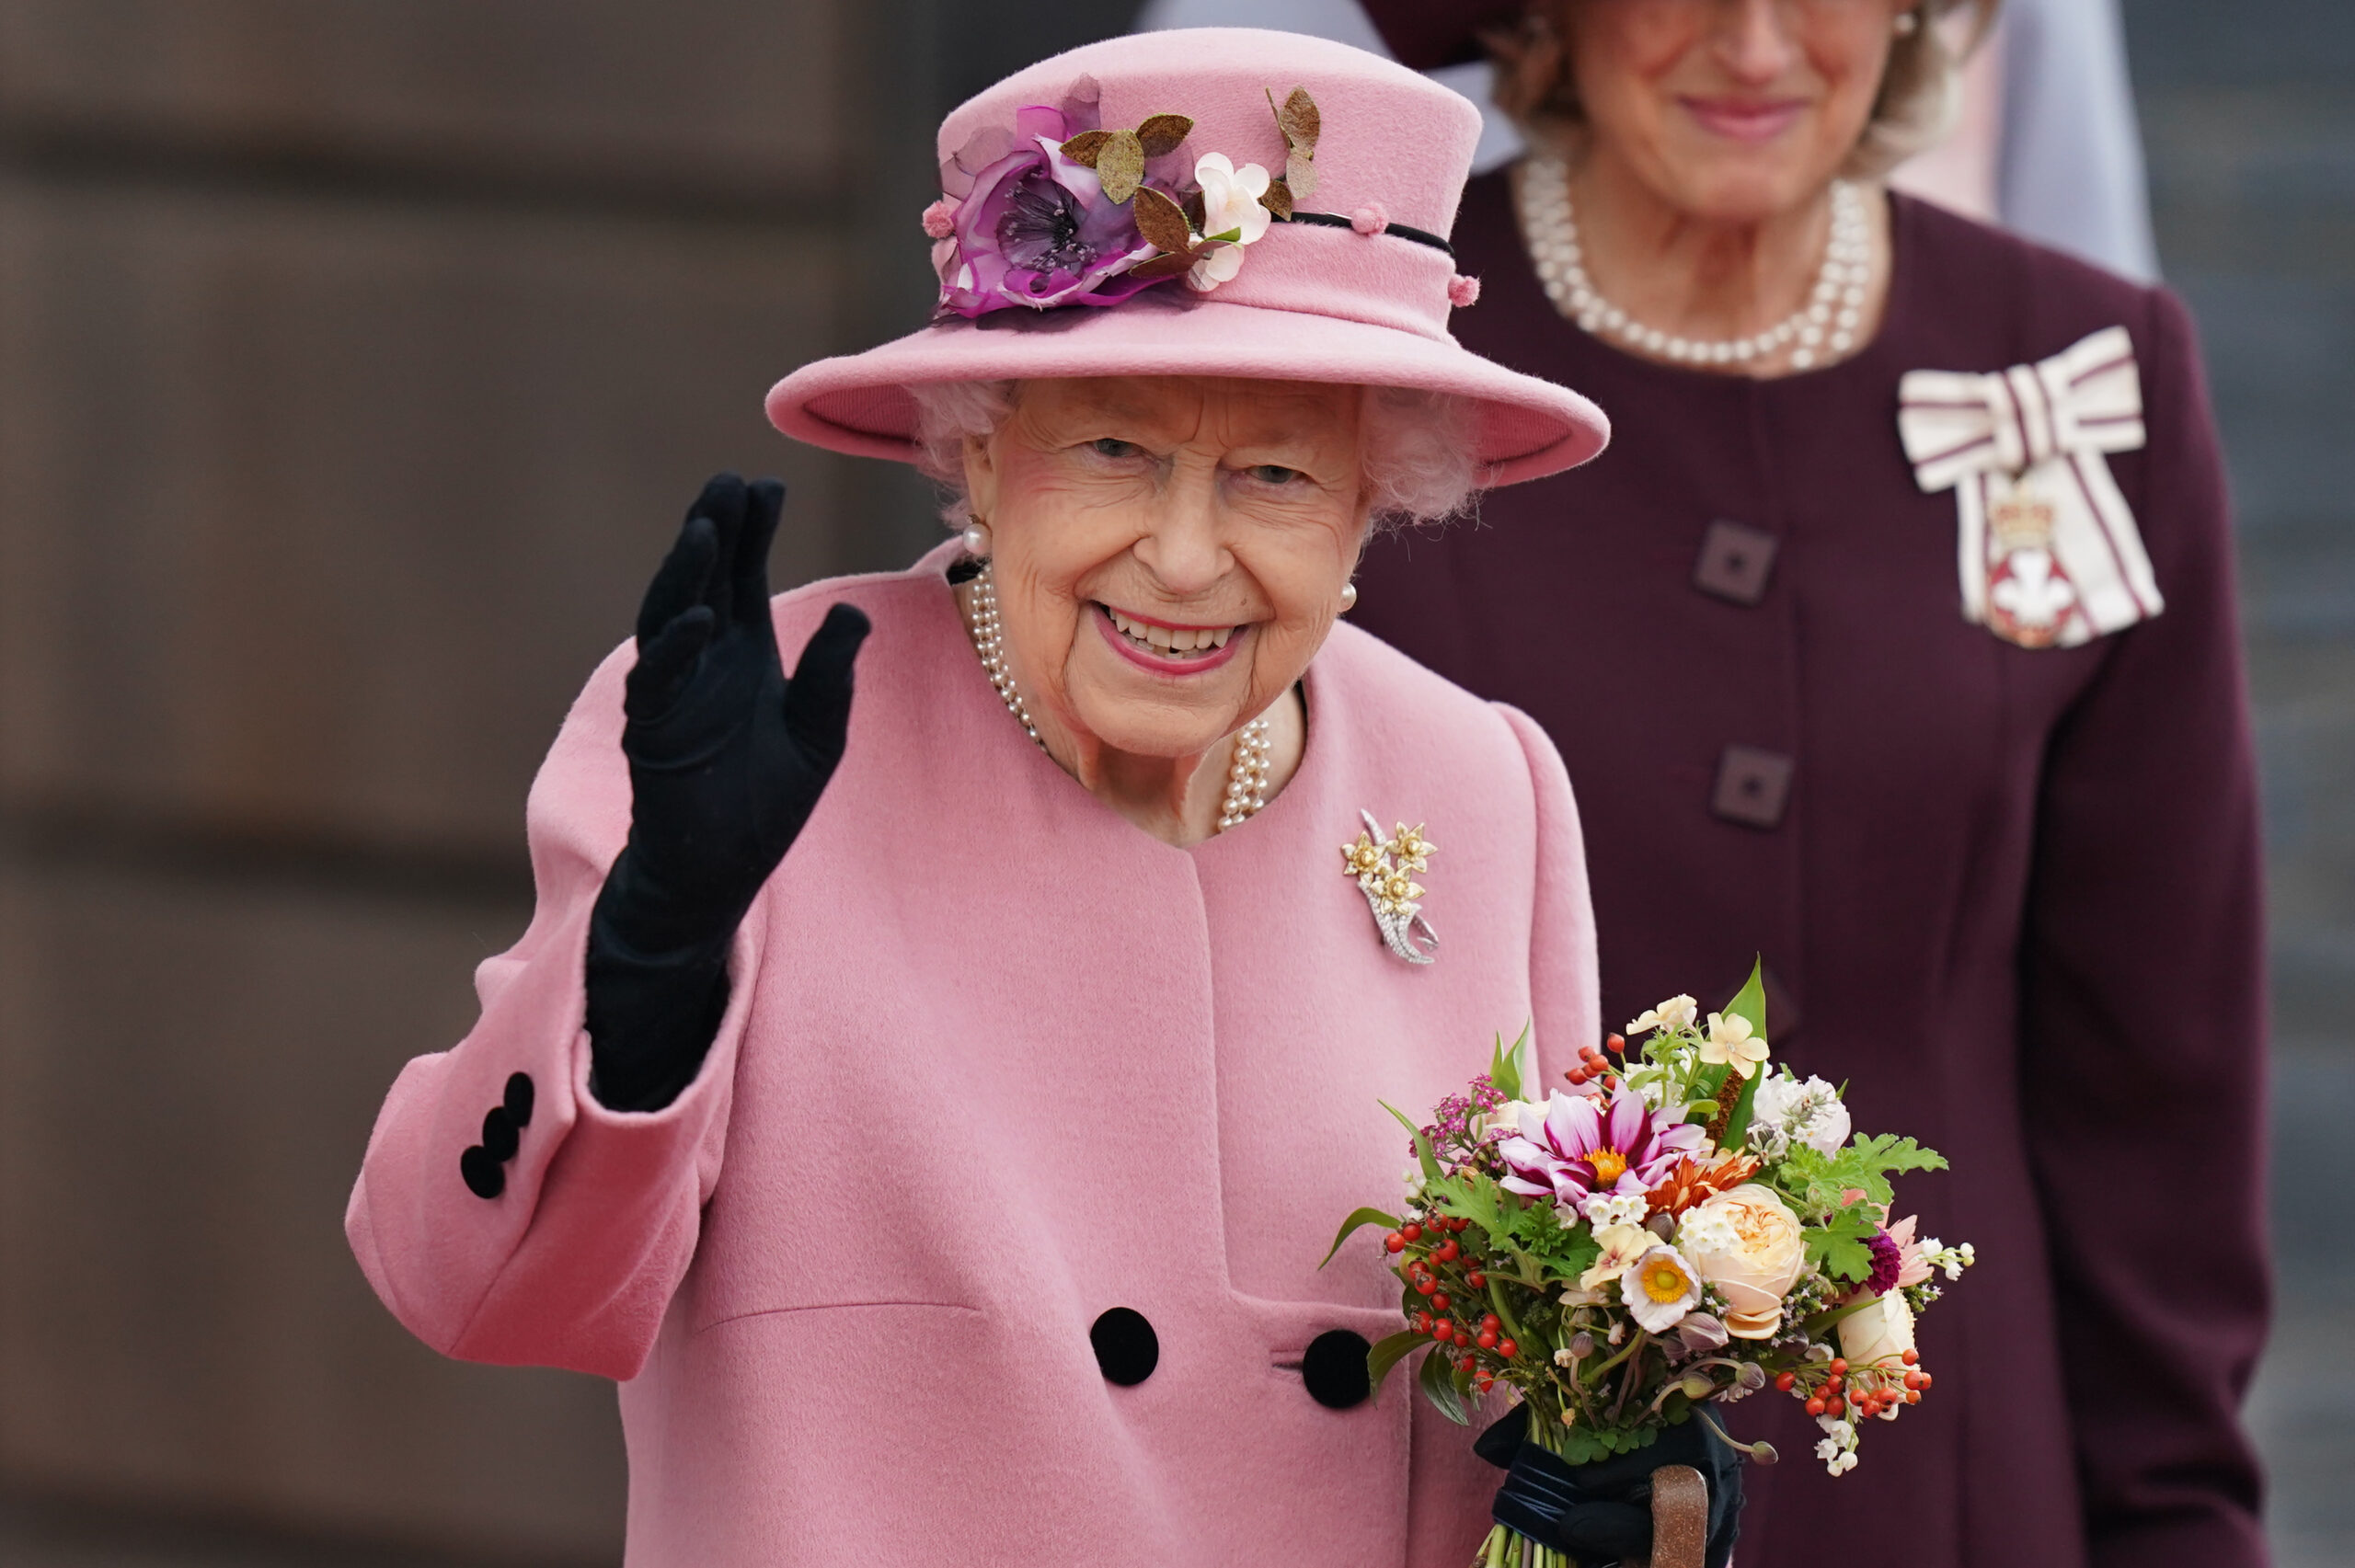 HM The Queen waving to a crowd in a pink dress, with a floral bouquet